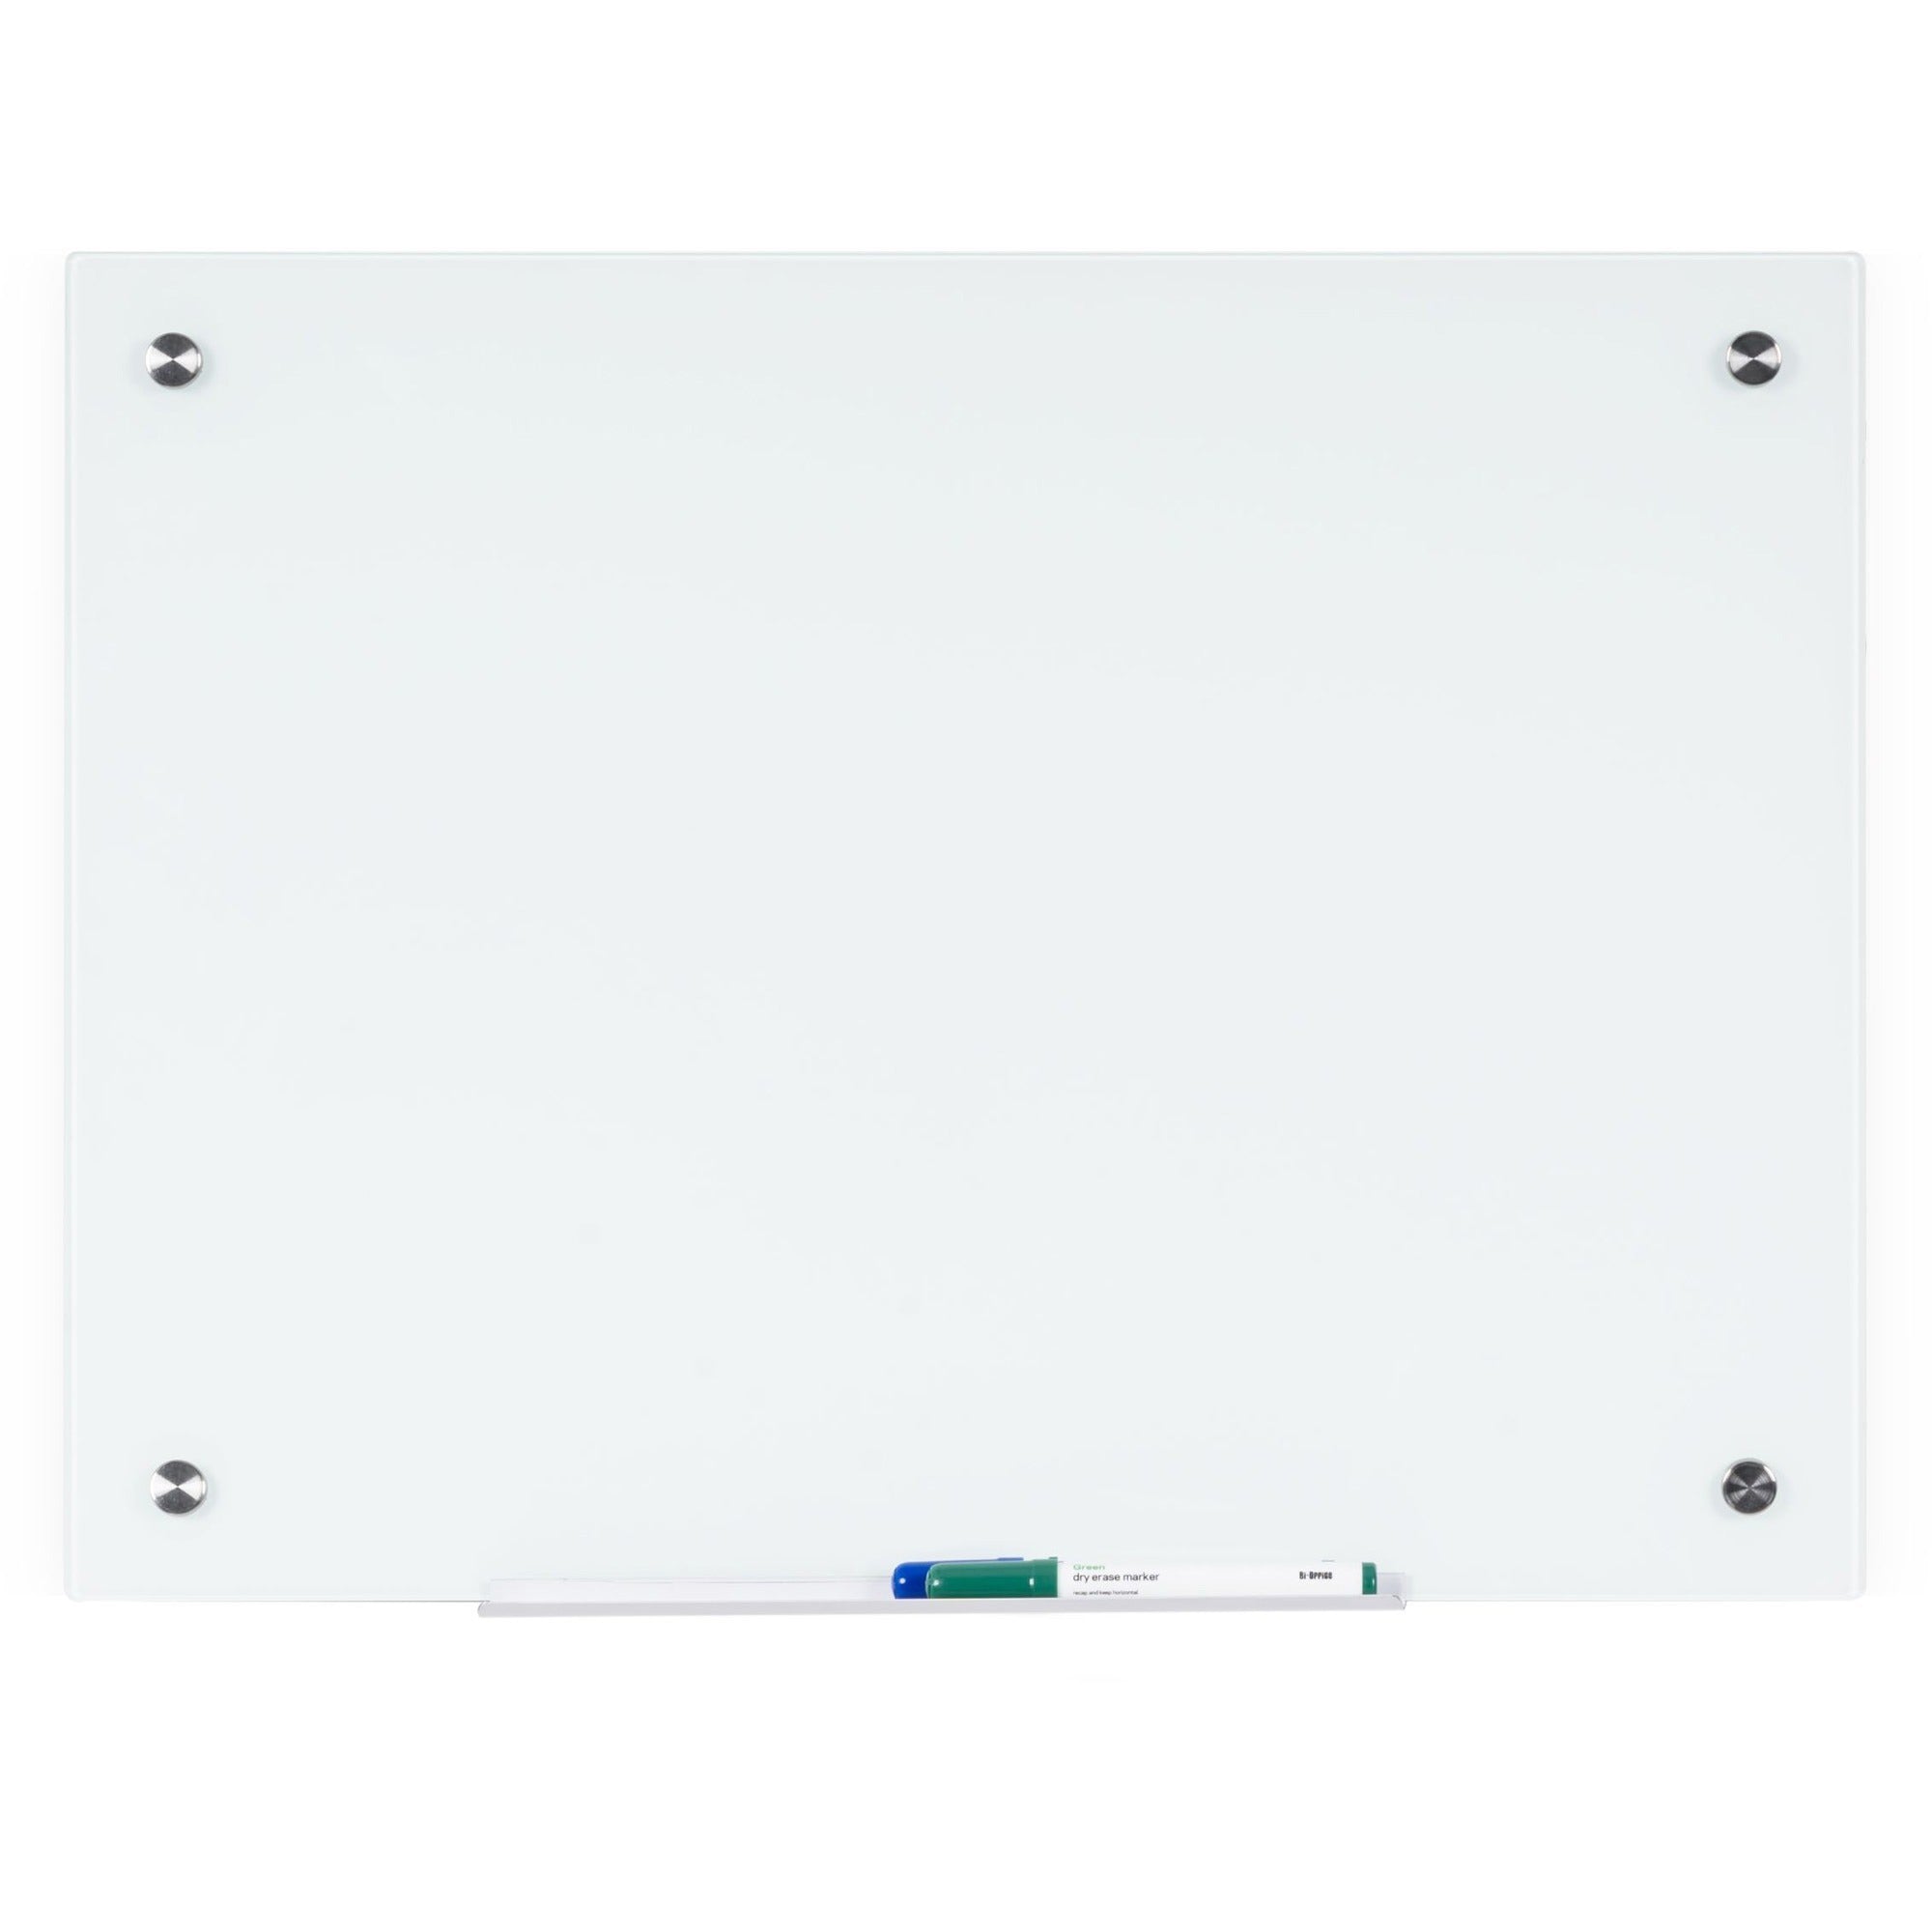 bi-silque-dry-erase-glass-board-36-3-ft-width-x-48-4-ft-height-white-glass-surface-rectangle-horizontal-vertical-1-each_bvcgl084407 - 1